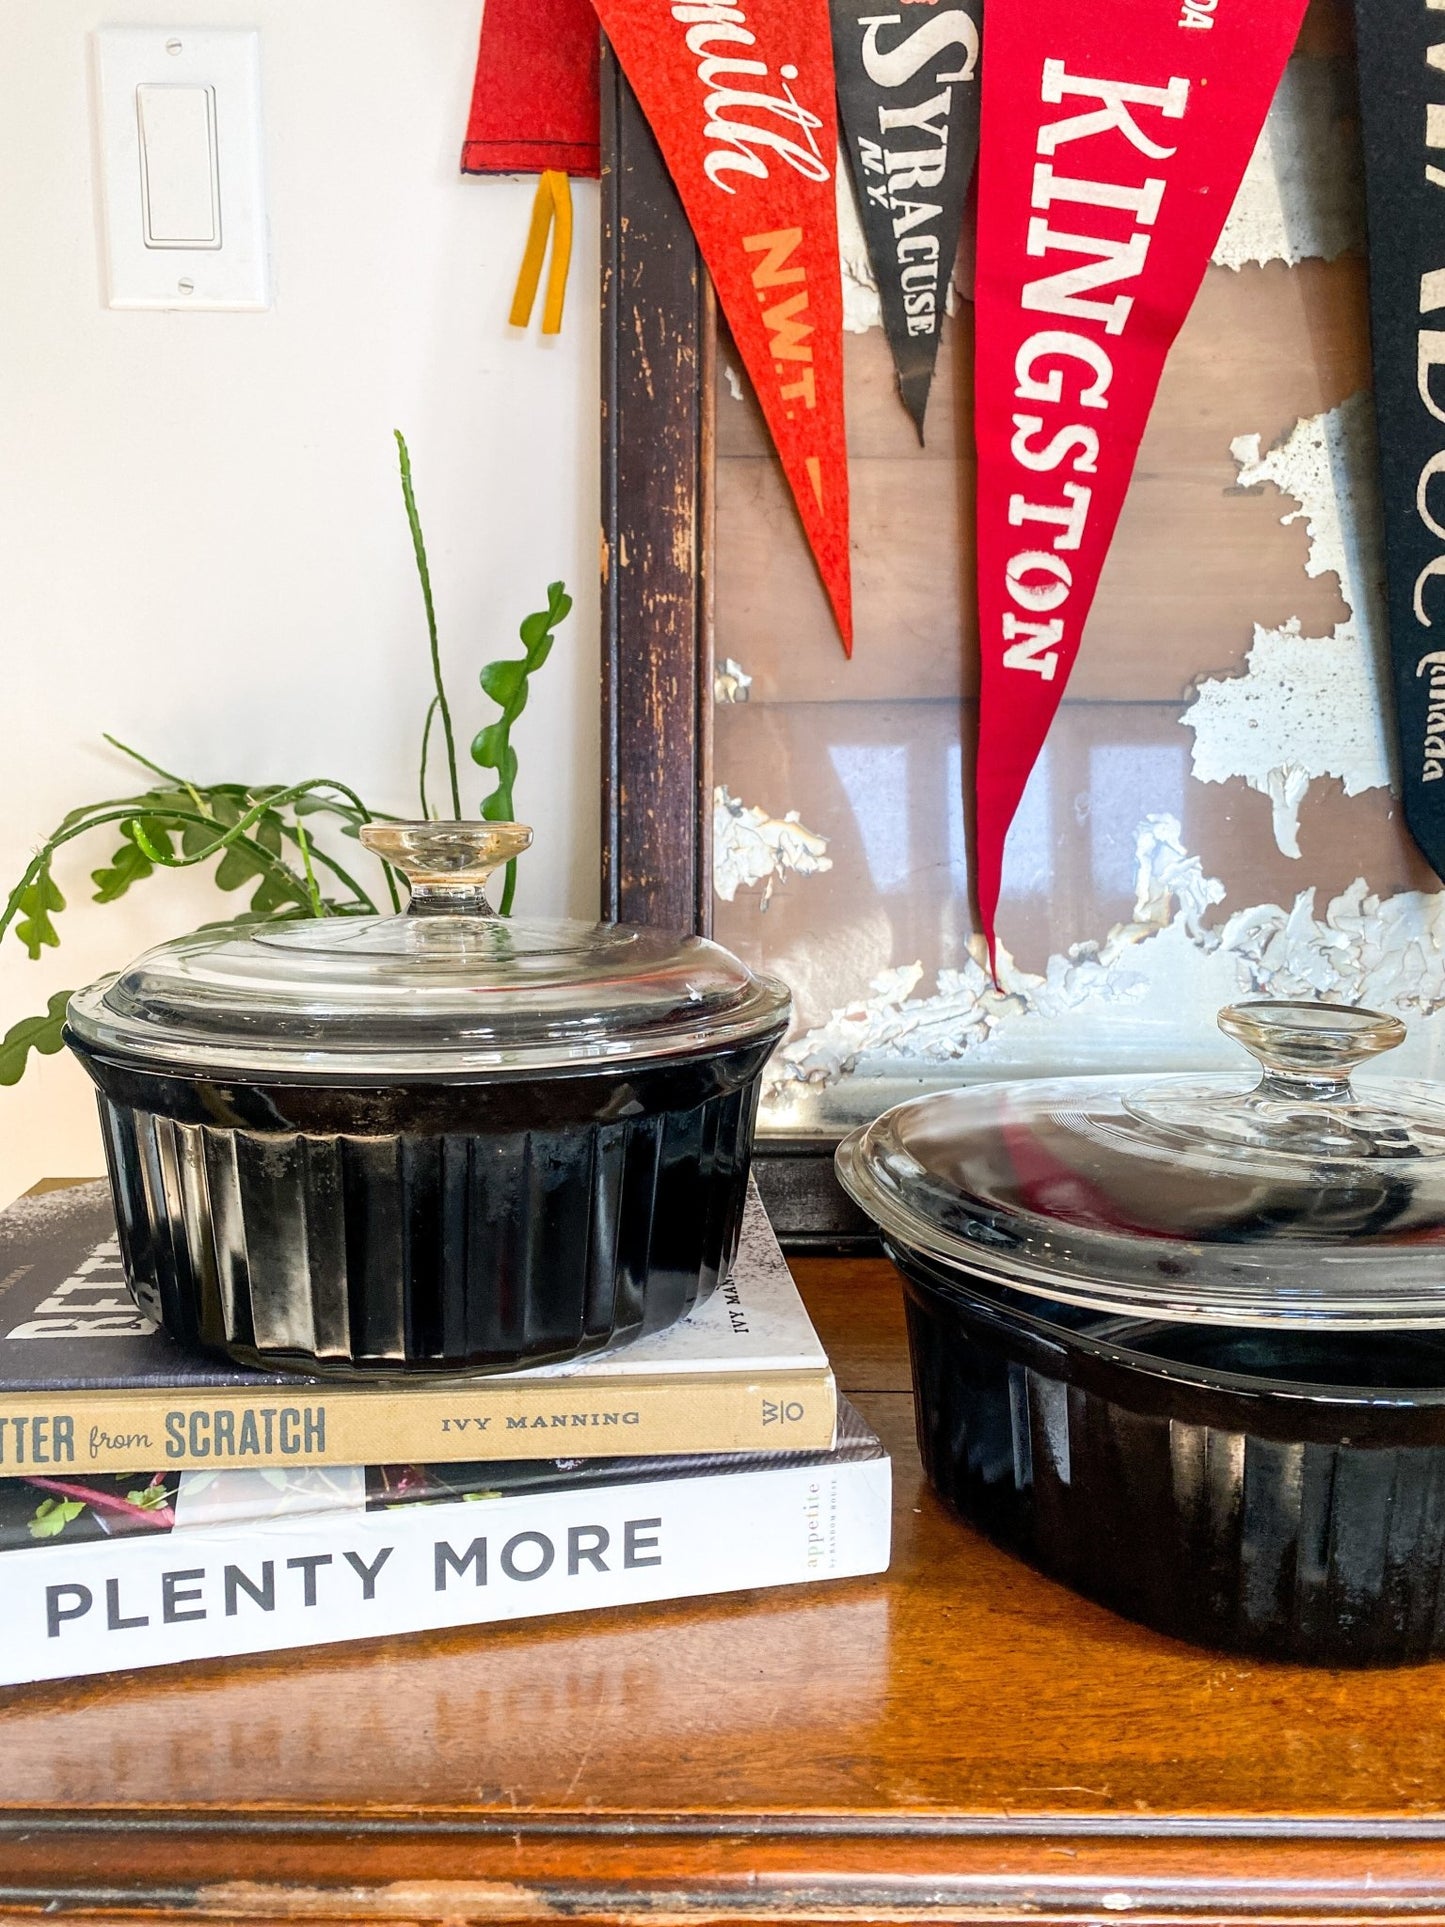 Two black glass casserole dishes are seen here with the lid. The smaller one is on top of 2 cookbooks, Better from Scratch and Plenty More. The larger obtuse one is sitting on a wooden table. There are vintage pennant flags visible in the background